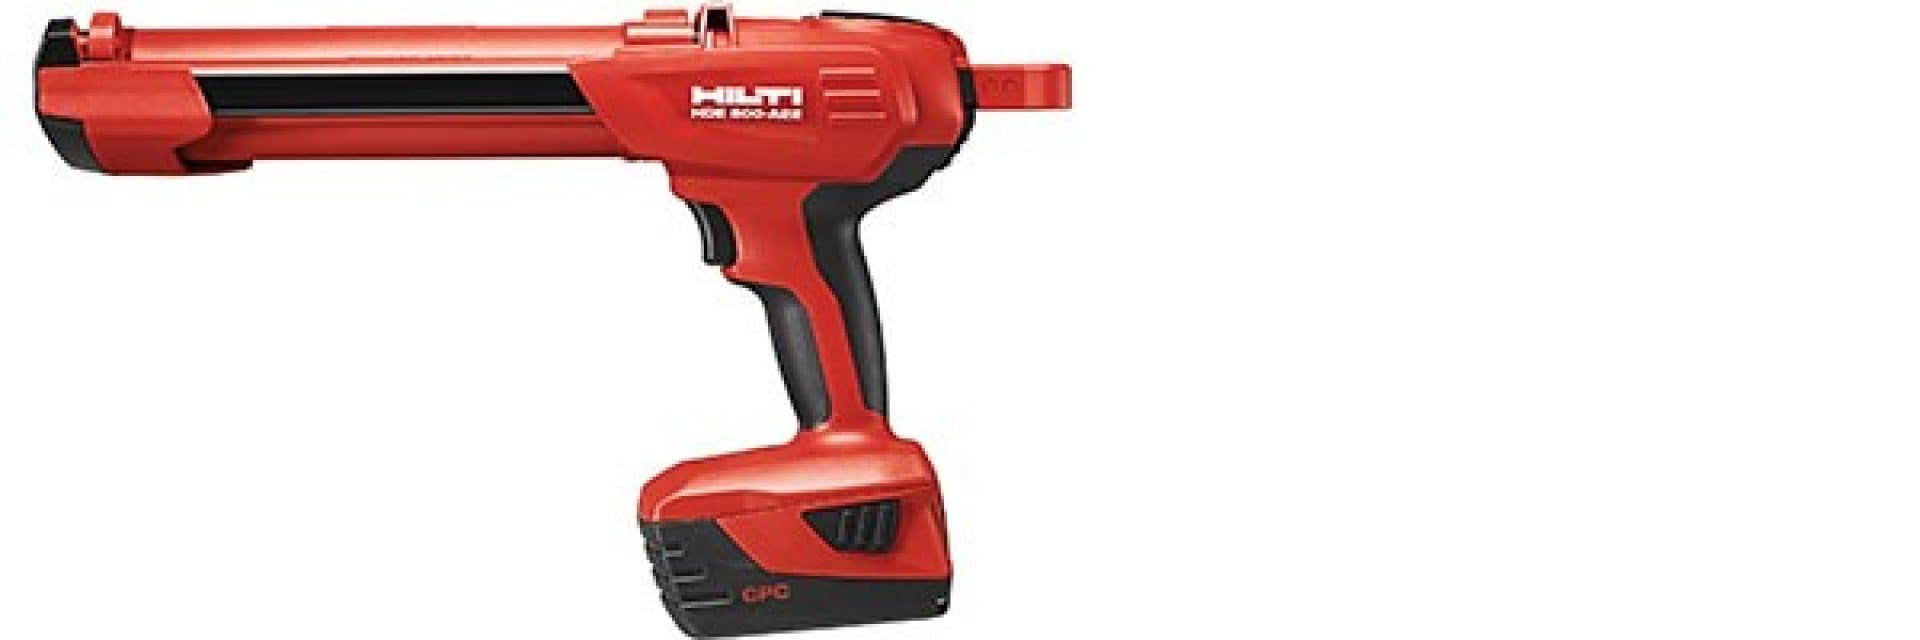 HDE 500-A22 electric dispenser to use with Hilti adhesive anchors